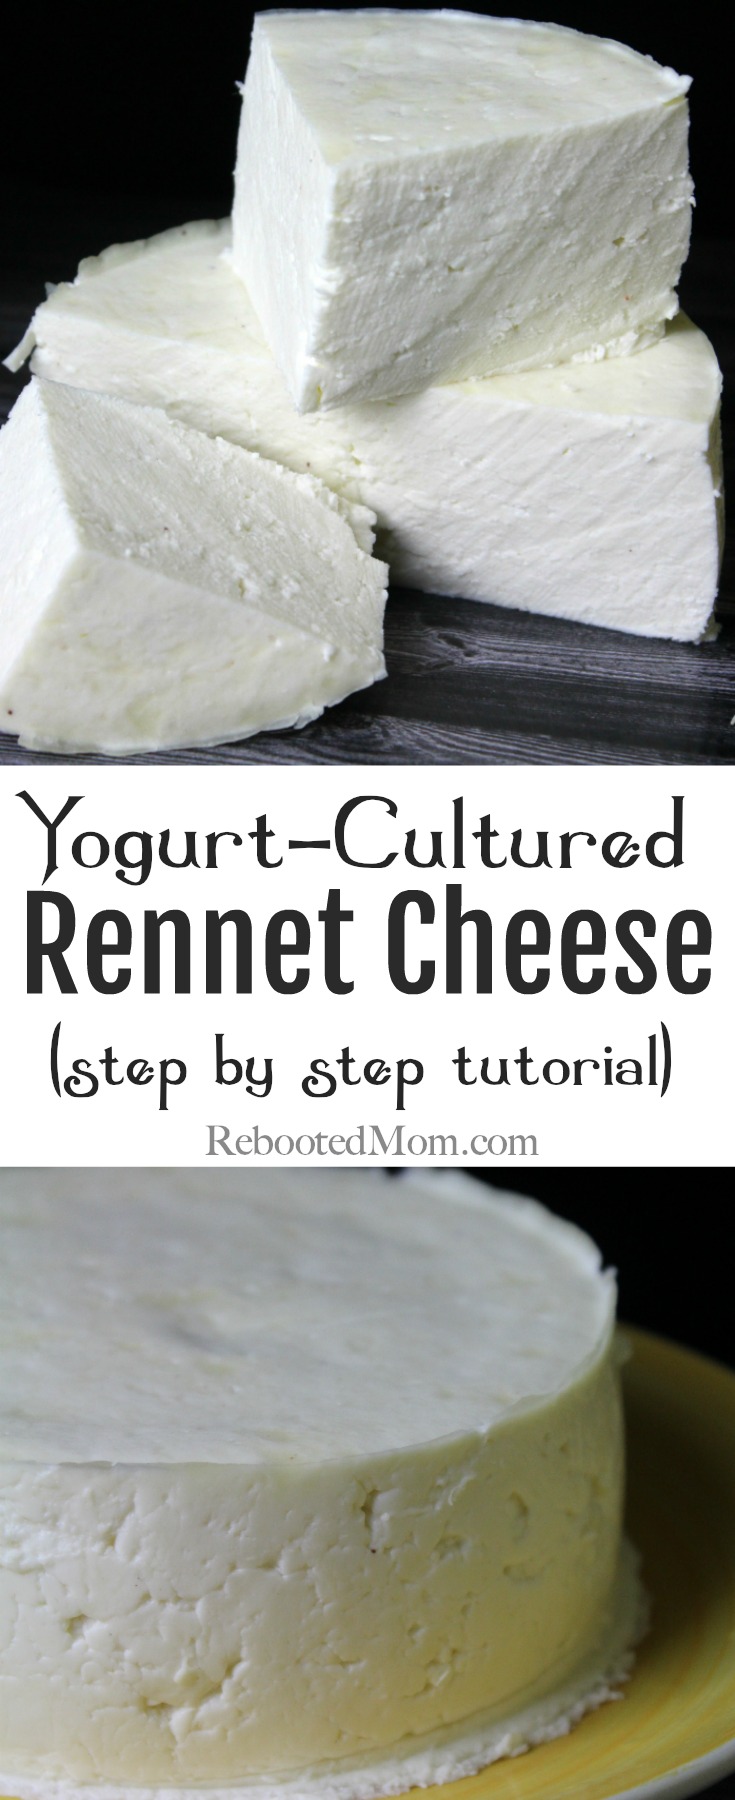 This Yogurt-Cultured Rennet Cheese Recipe is an easy way to learn the art of cheesemaking and requires just 3 simple ingredients!    #rennet #cheese #yogurt #cheesemaking #realfood #rawmilk